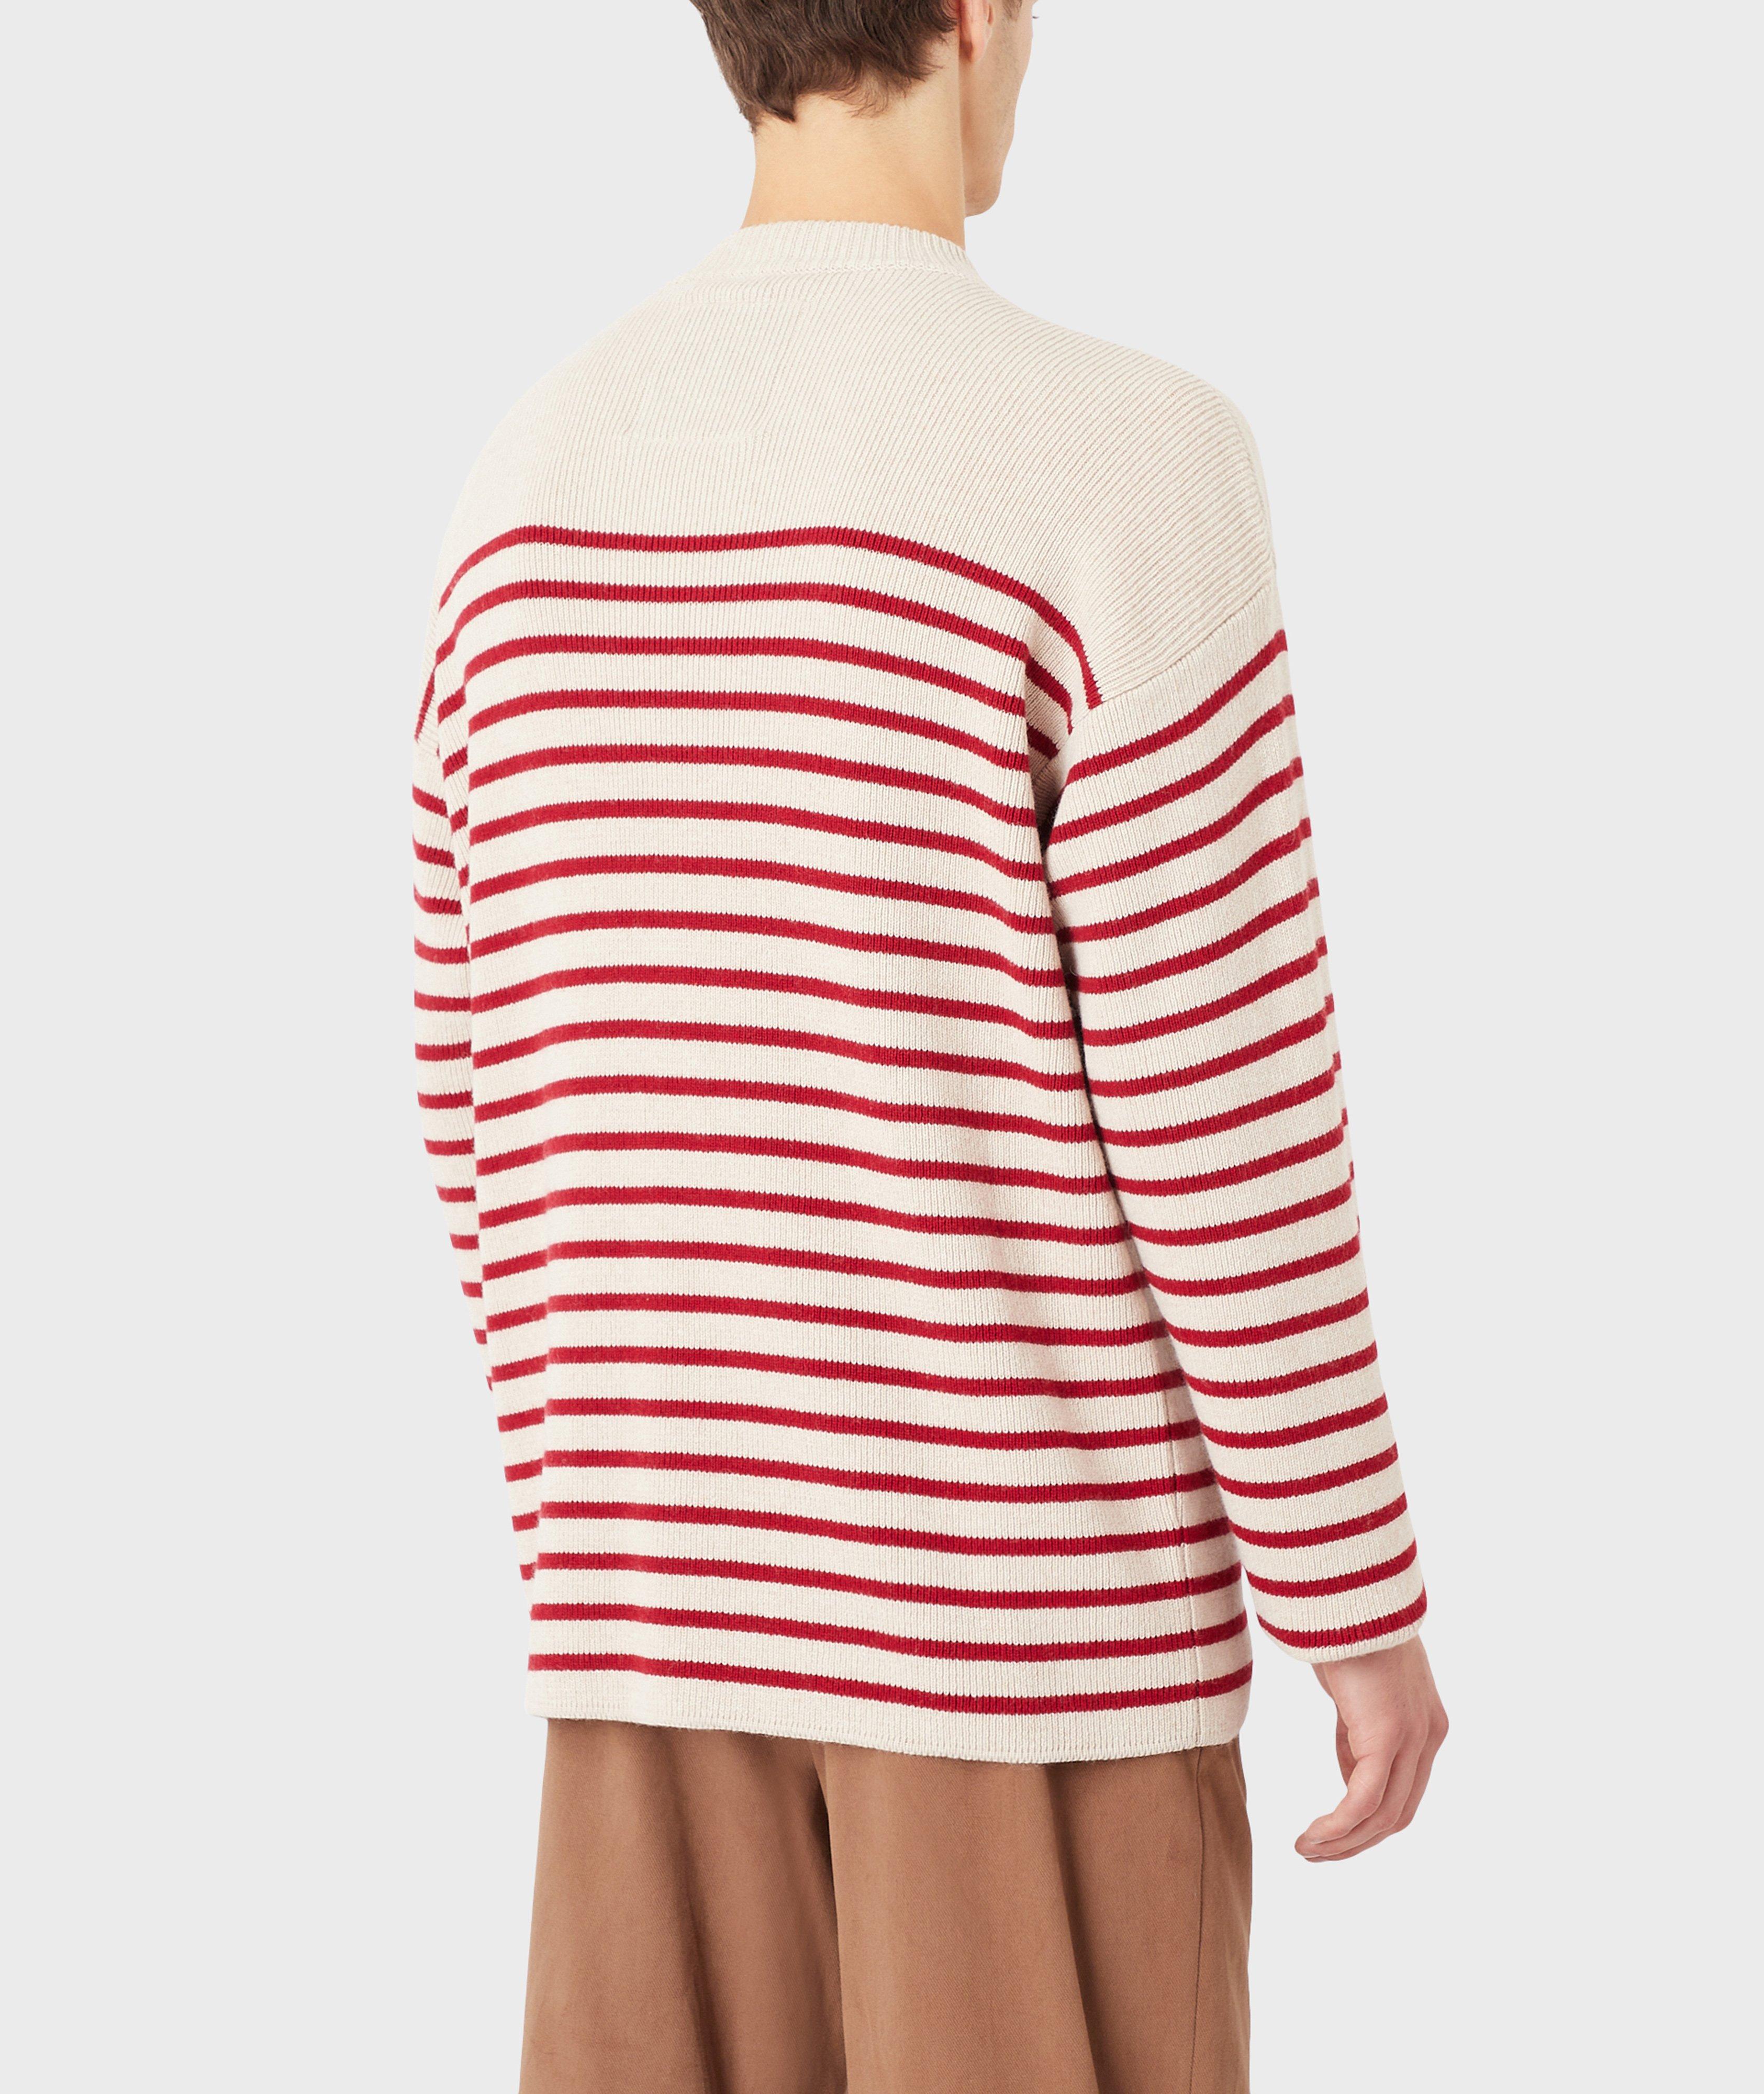 EArctic Sustainable Collection Wool-Blend Striped Jumper image 2